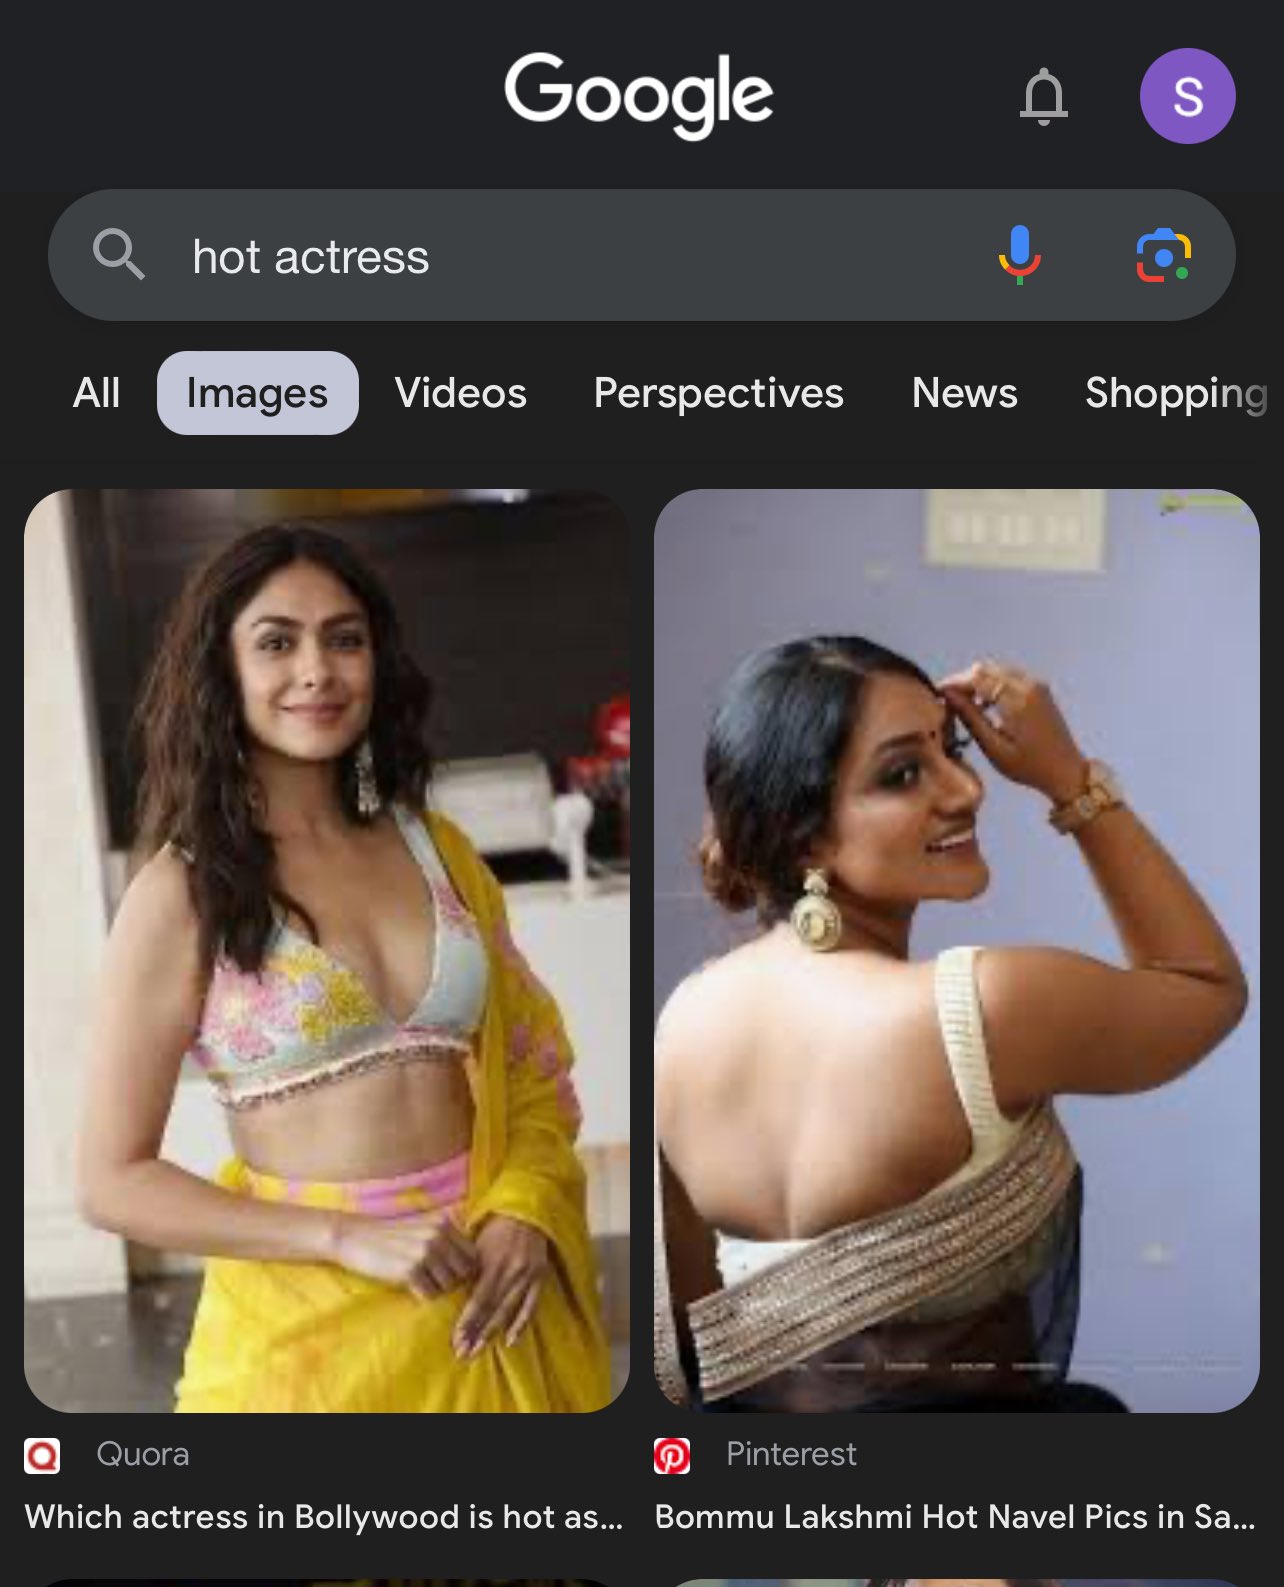 Which are the hottest pictures of actresses with lingerie? - Quora